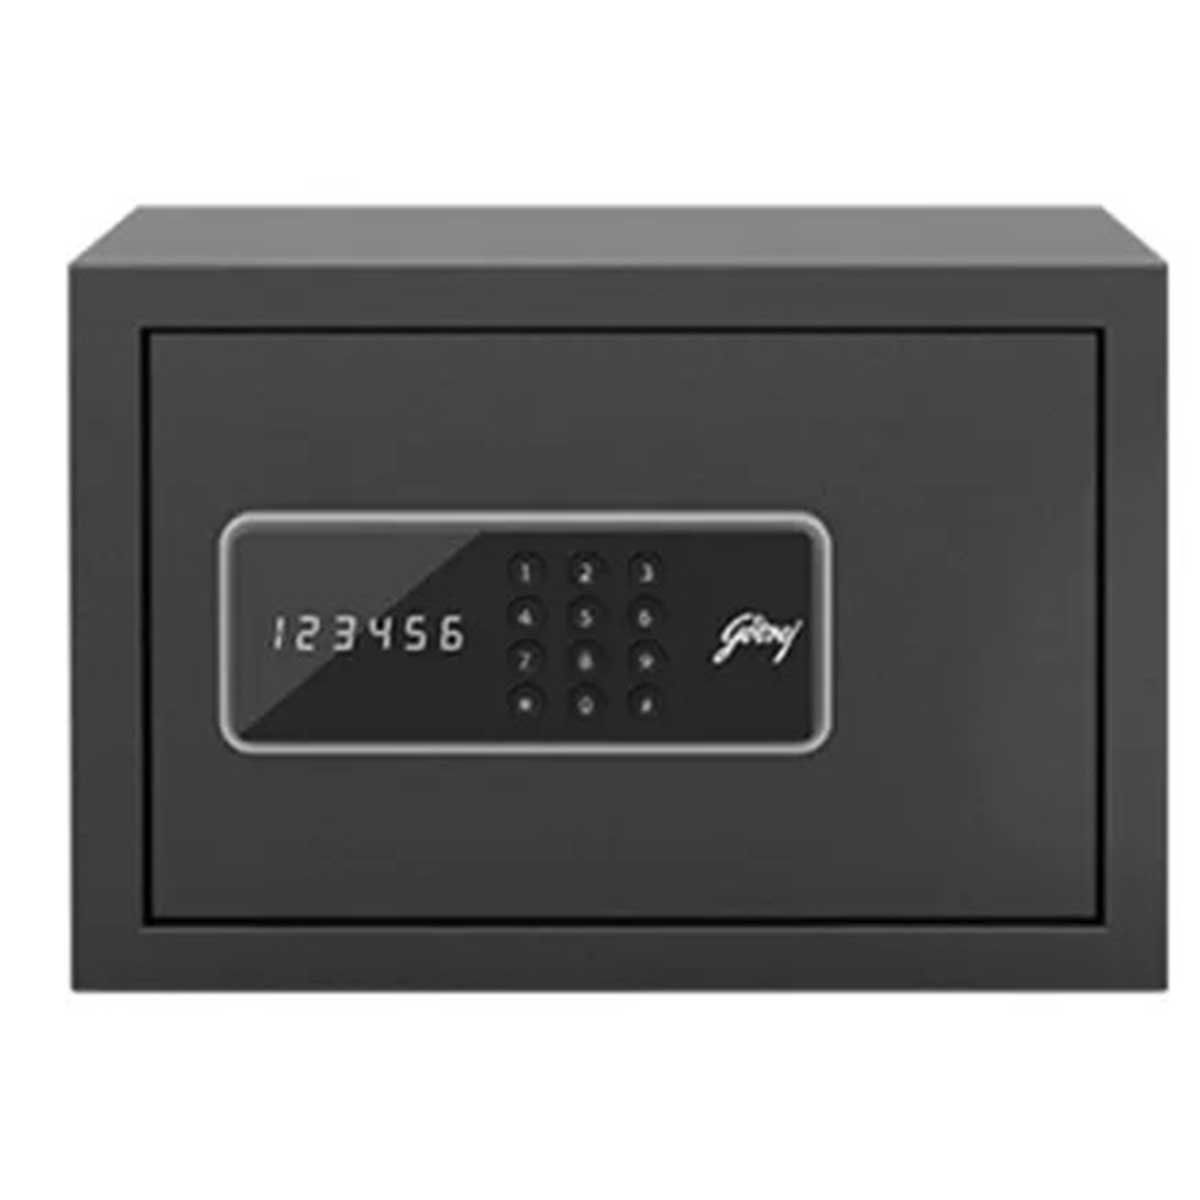 Security Safes Manufacturers, Suppliers in Civil Lines